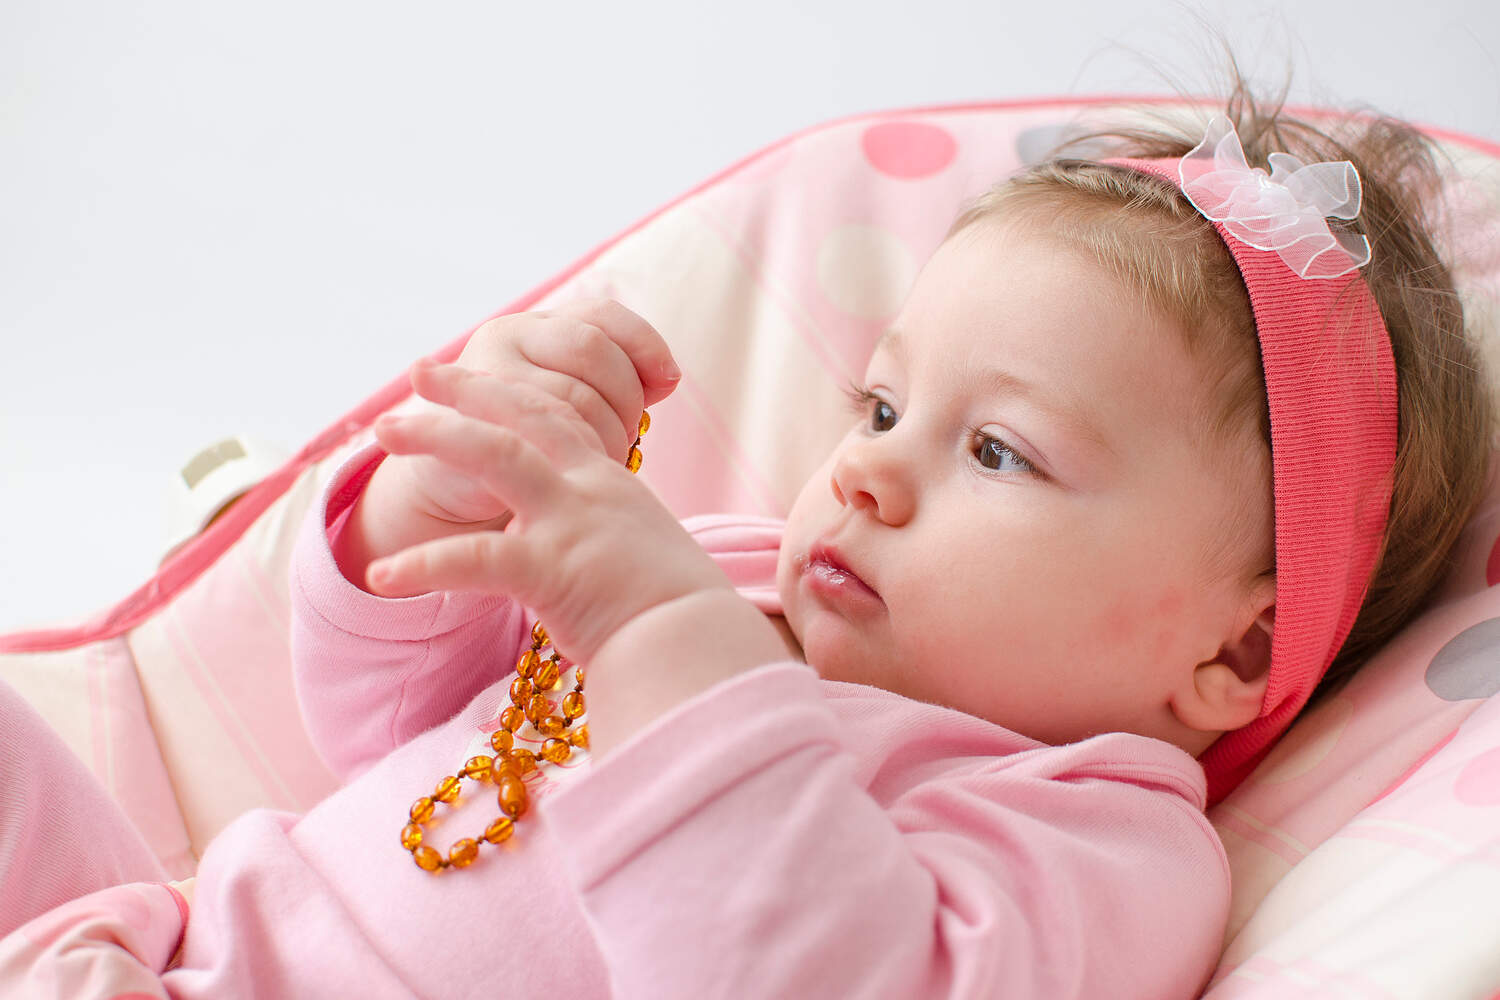 Amber teething necklace risks